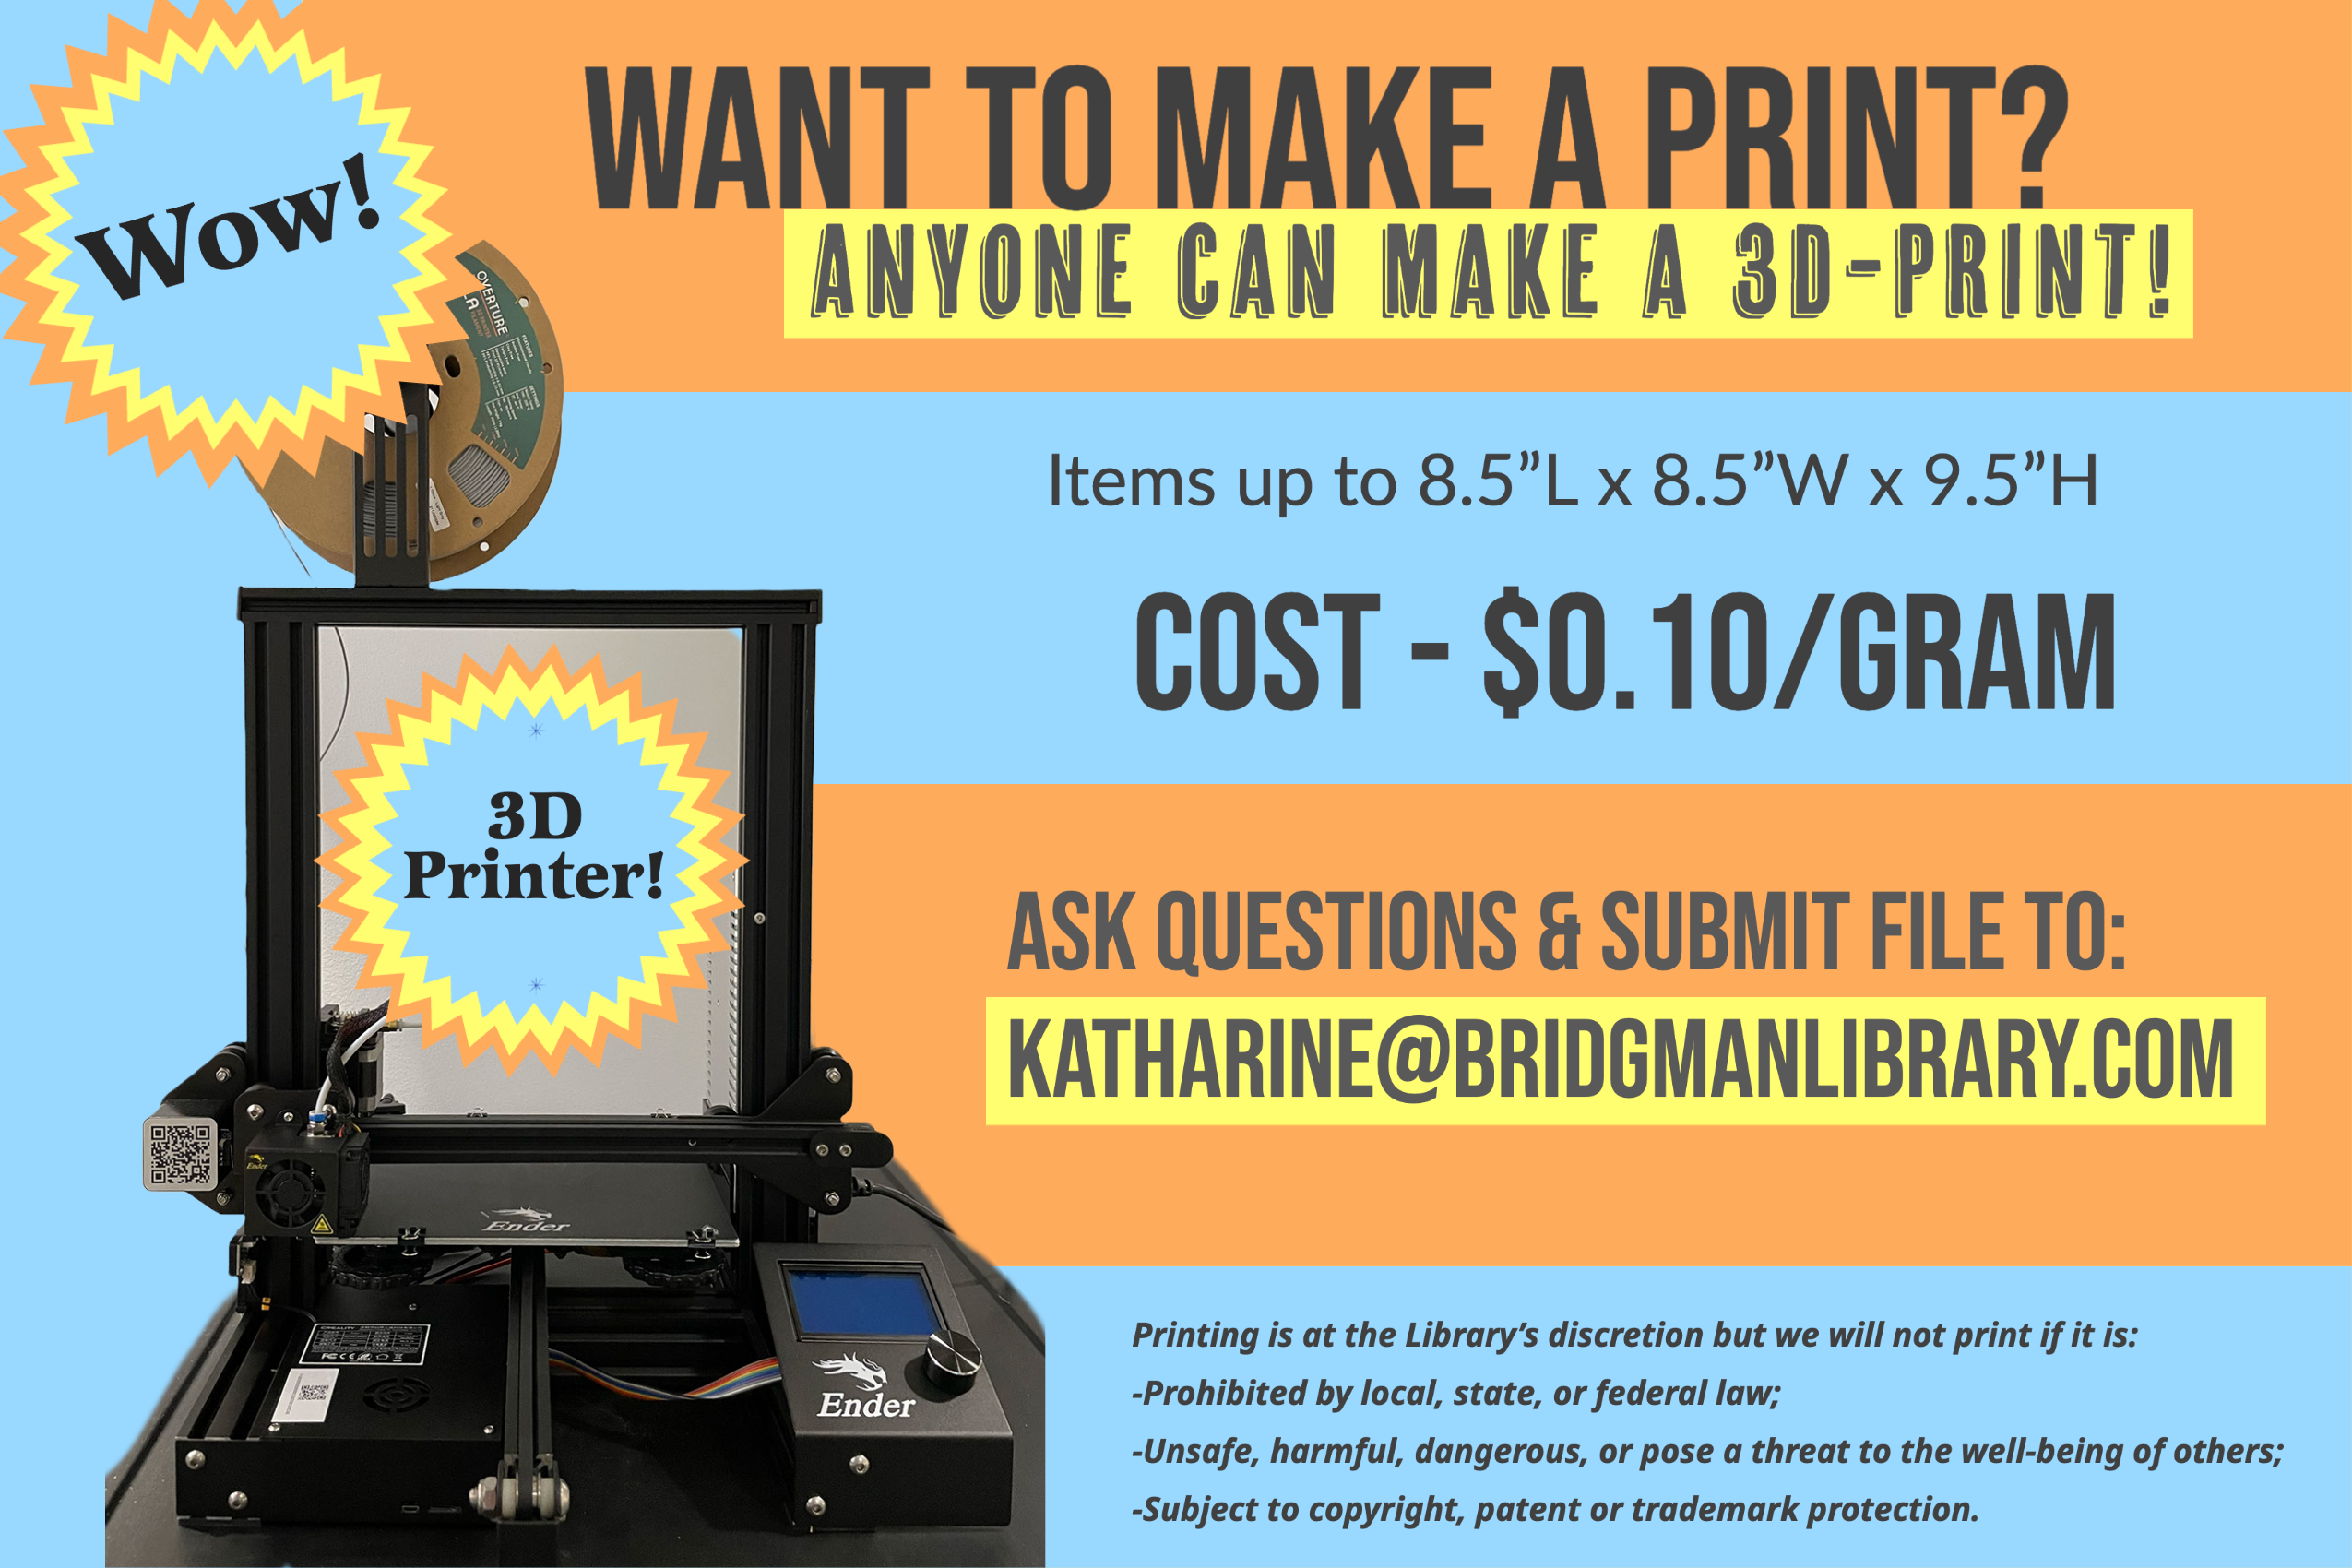 A link to information about our 3D printer.